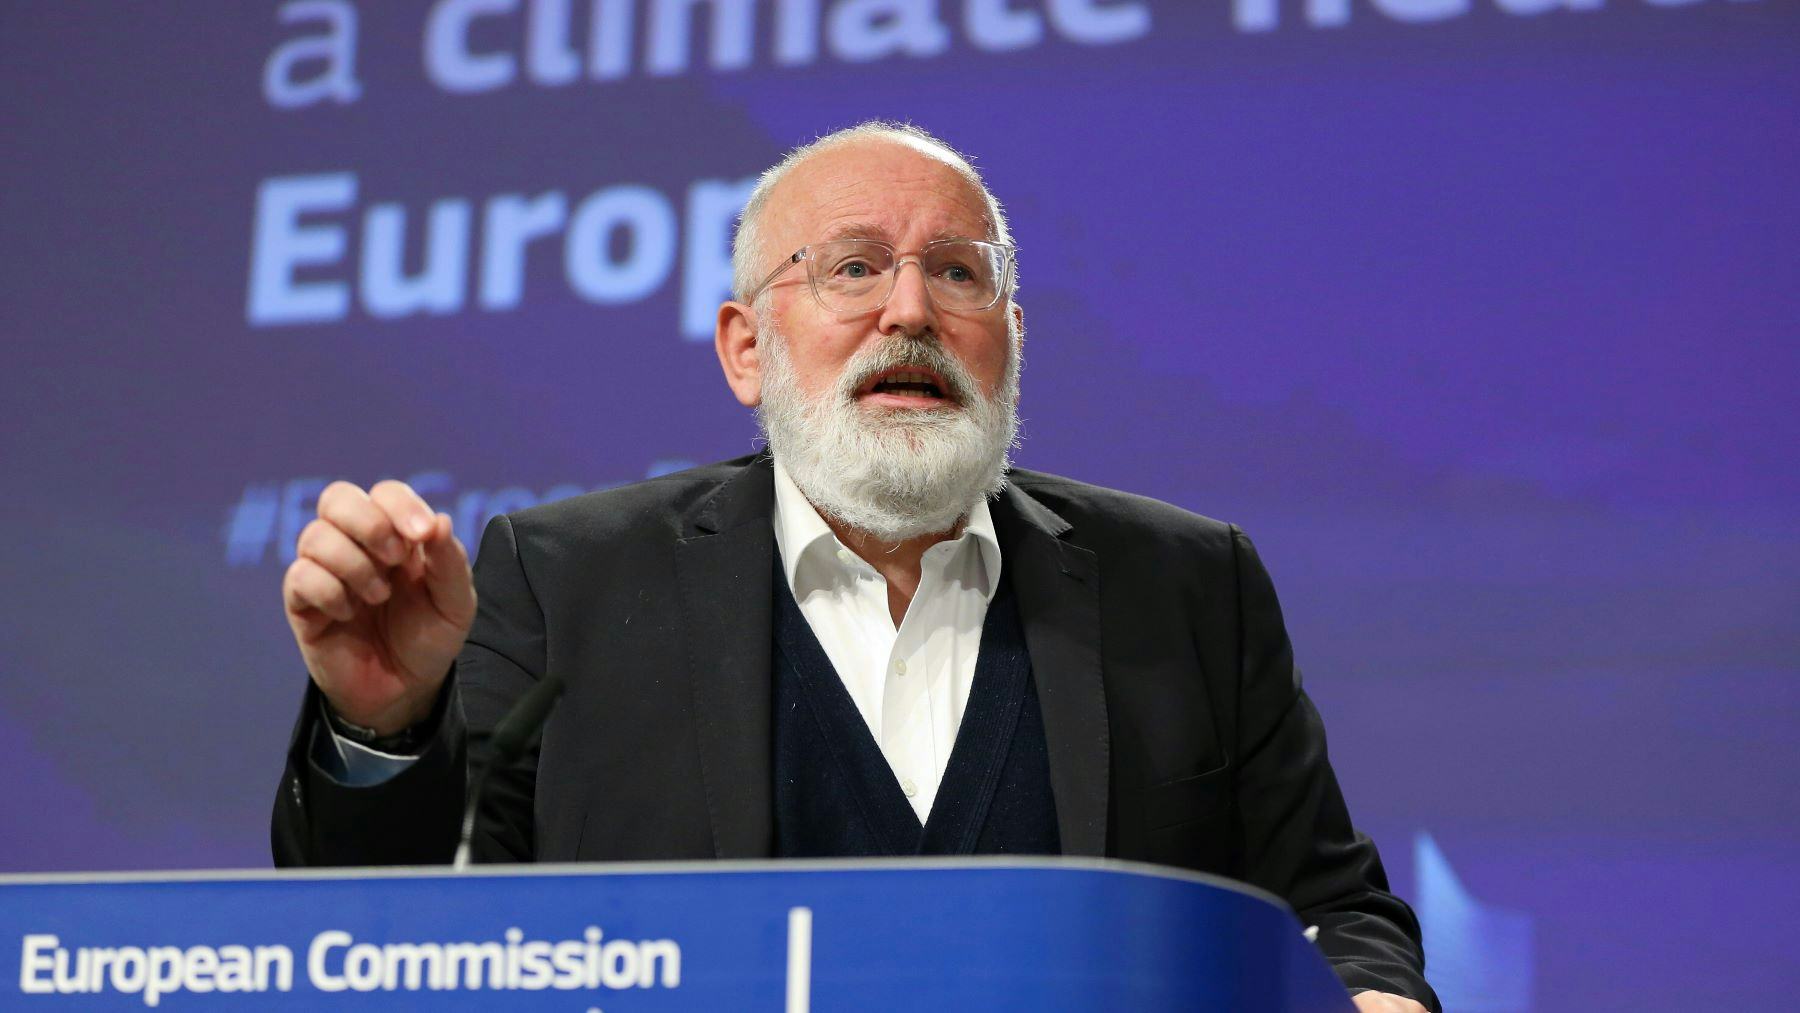 Executive vice-president of the EU Commission and cycling advocate, Frans Timmermans will deliver the keynote speech during the CIE summit. – Photo Shutterstock